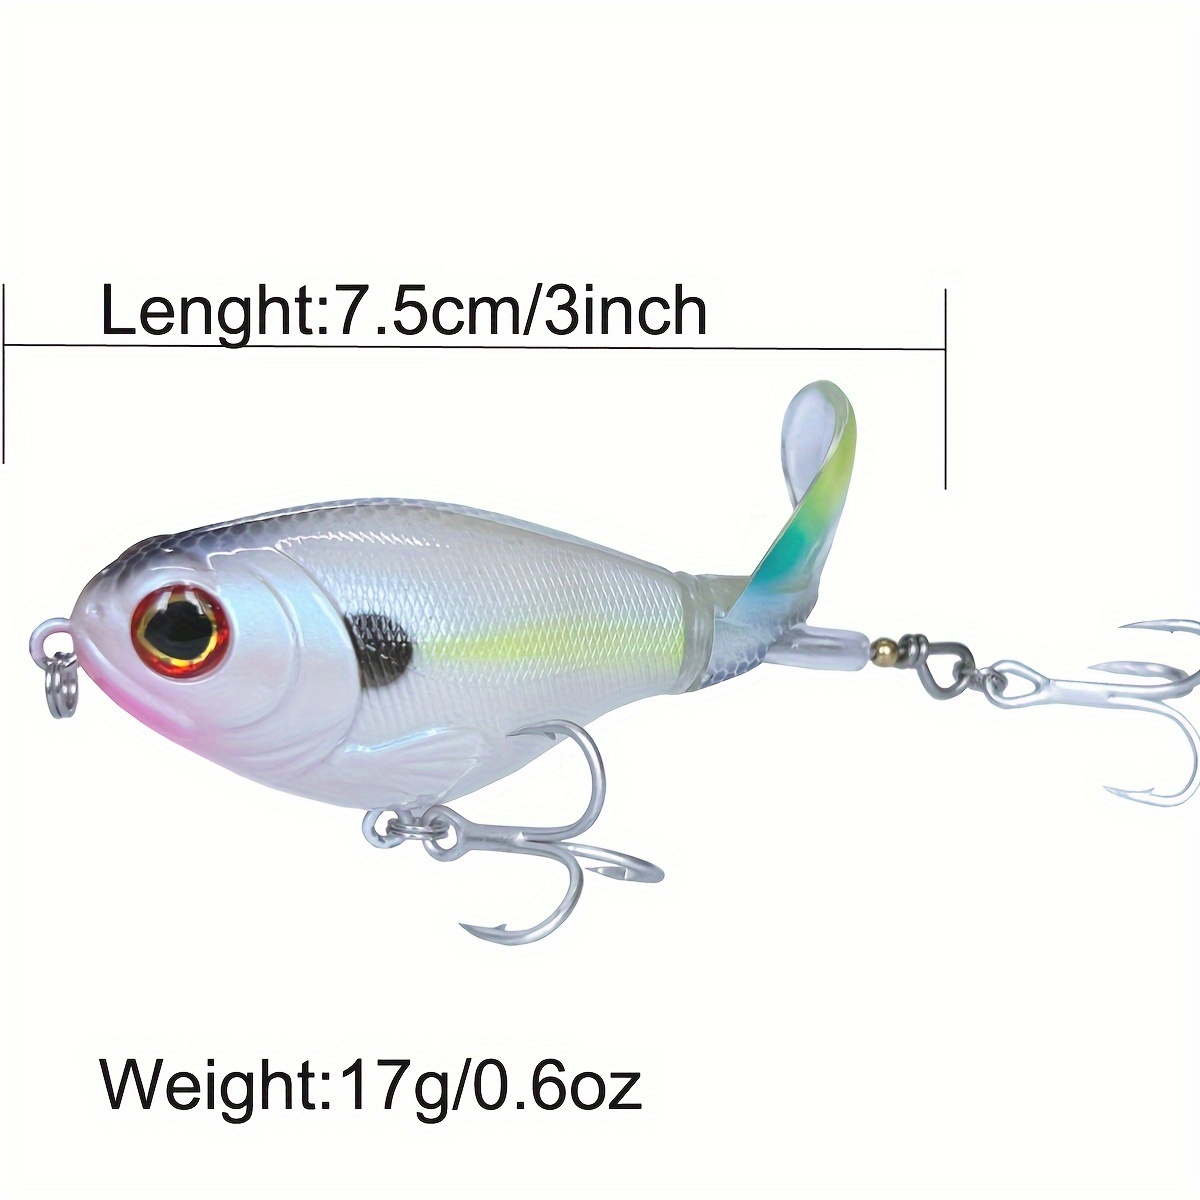 Lurefans Fishing Lure Set Wobbler Flathead Catfish Bait With Vib Sinking  For Catfish, Pike, And Artificial Bait Tackle Available In 35mm, 40mm; And  45mm Sizes Pesca 230909 From Ren05, $14.15